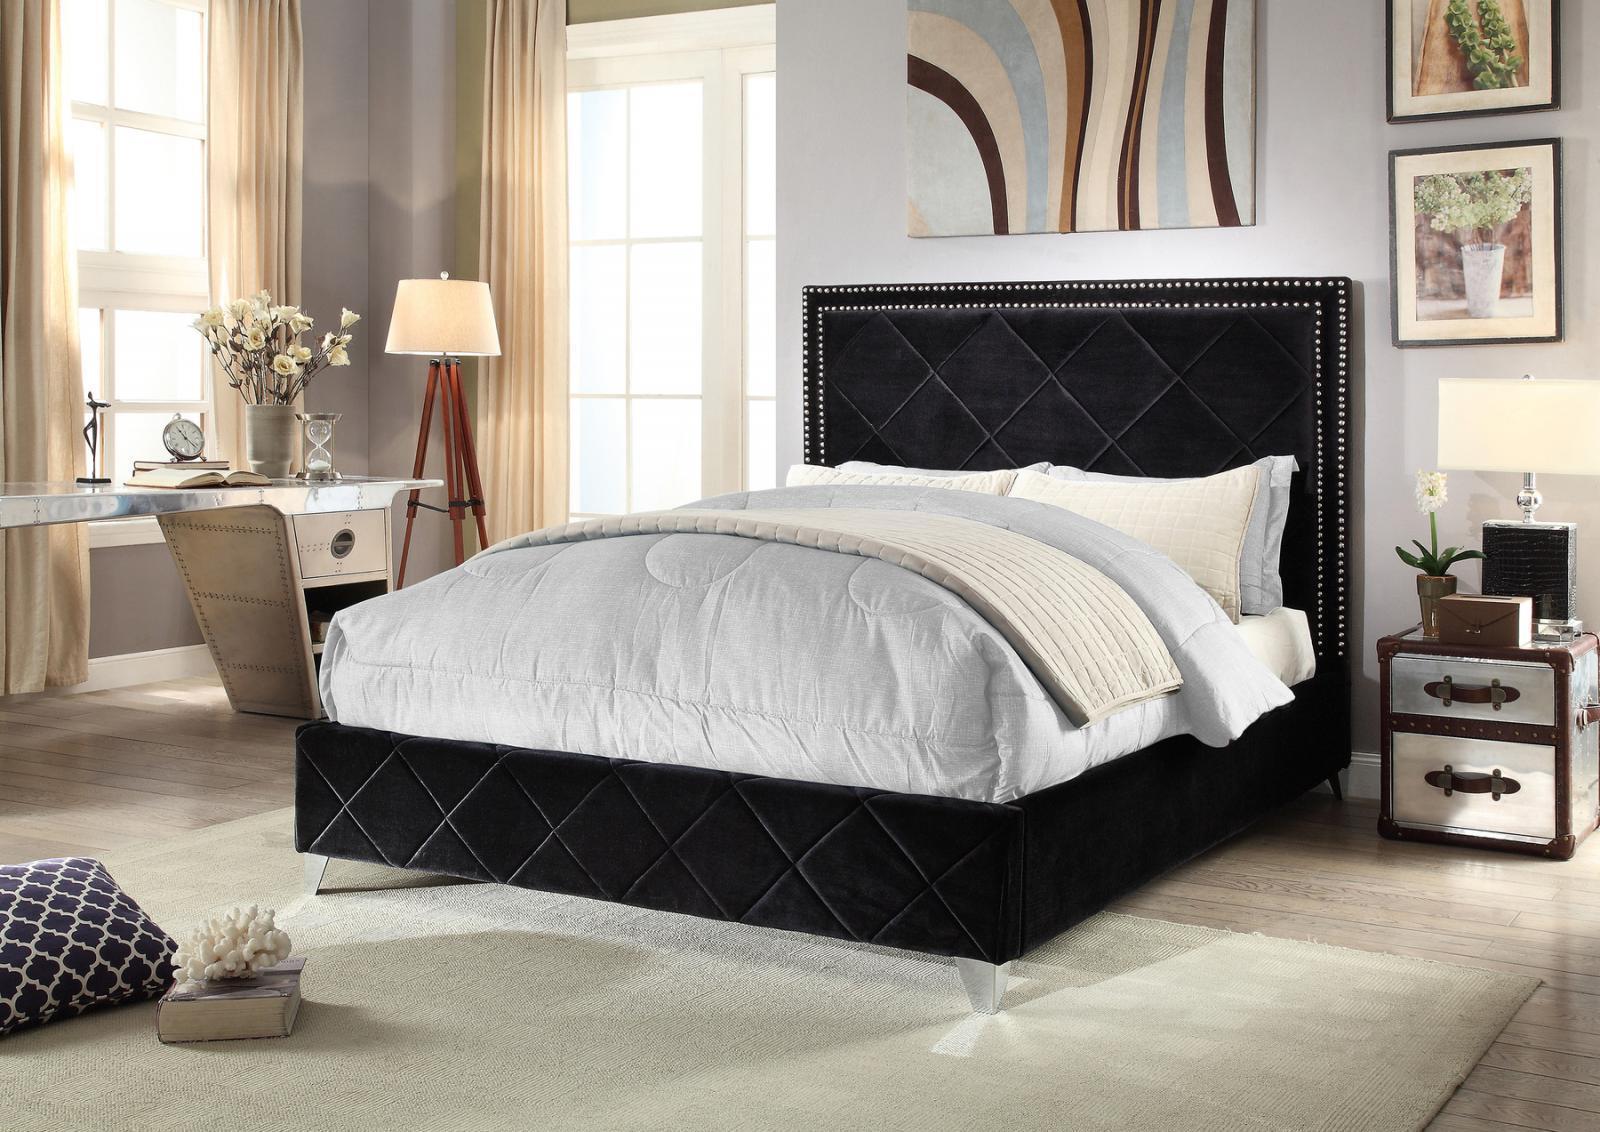 

    
Meridian Hampton Queen Size Bed in Black Chrome Nailheads Contemporary Style
